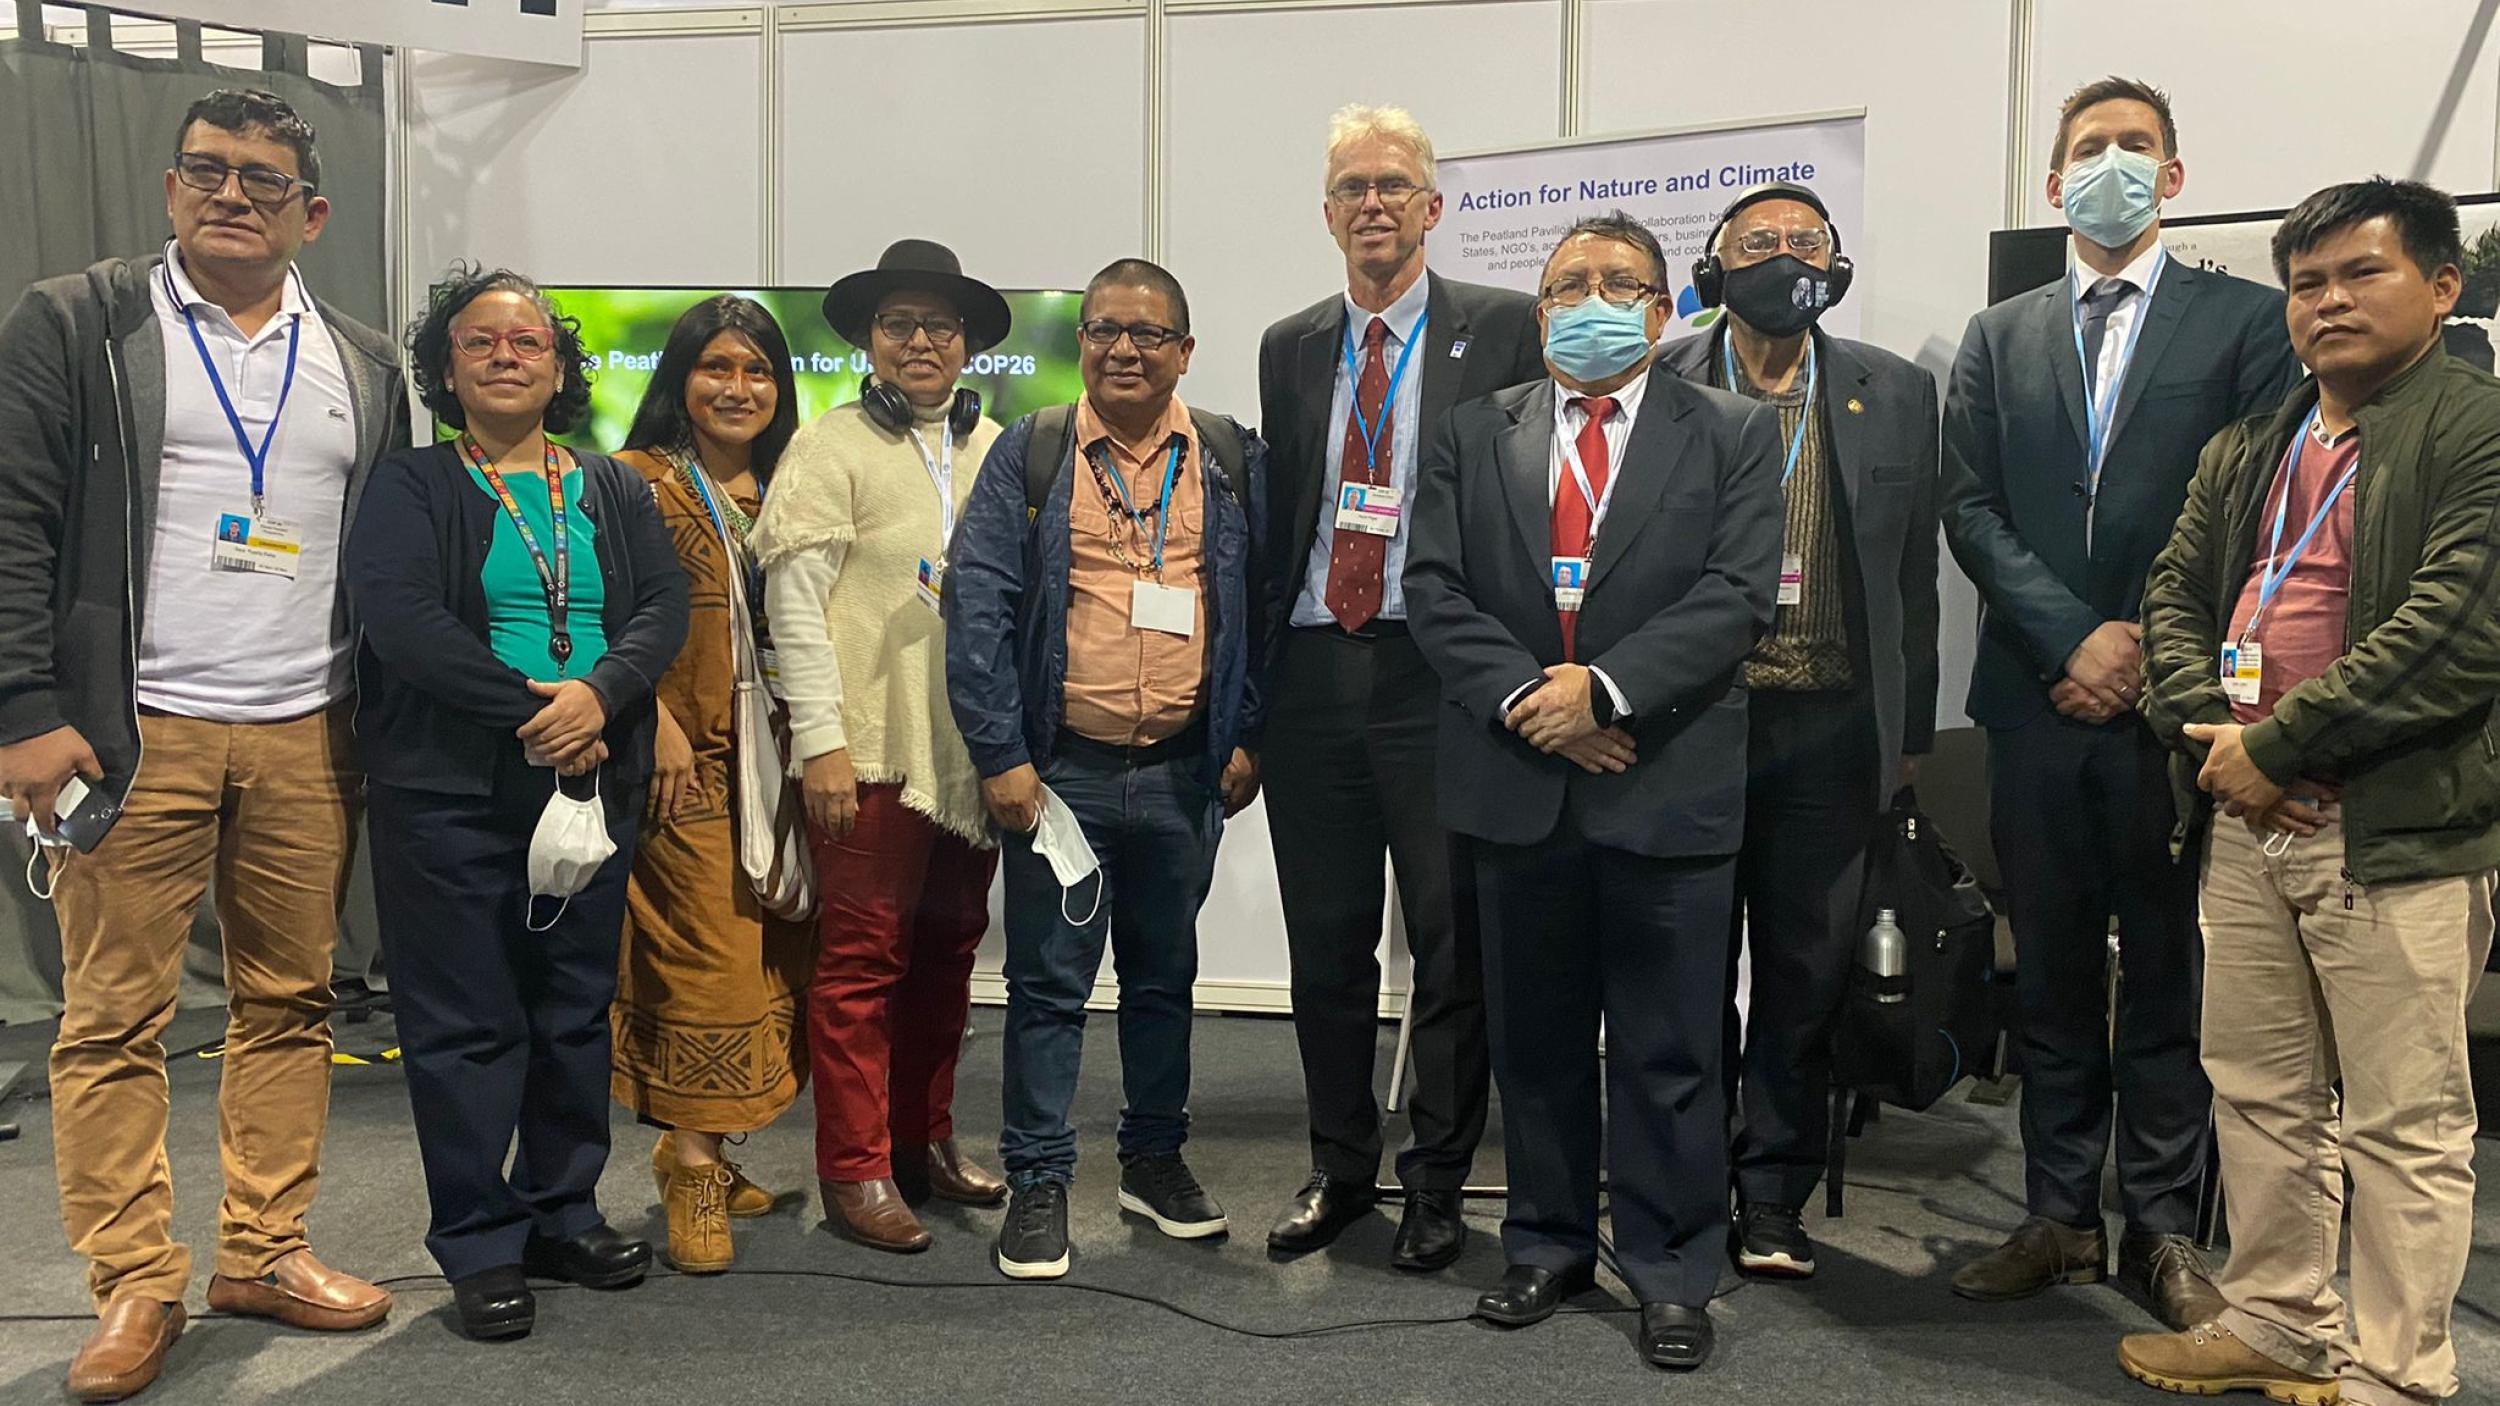 The delegation from the Peruvian Ministry for the Environment invited indigenous representatives to talk about indigenous perspectives on ecosystem preservation and the power of indigenous knowledge.